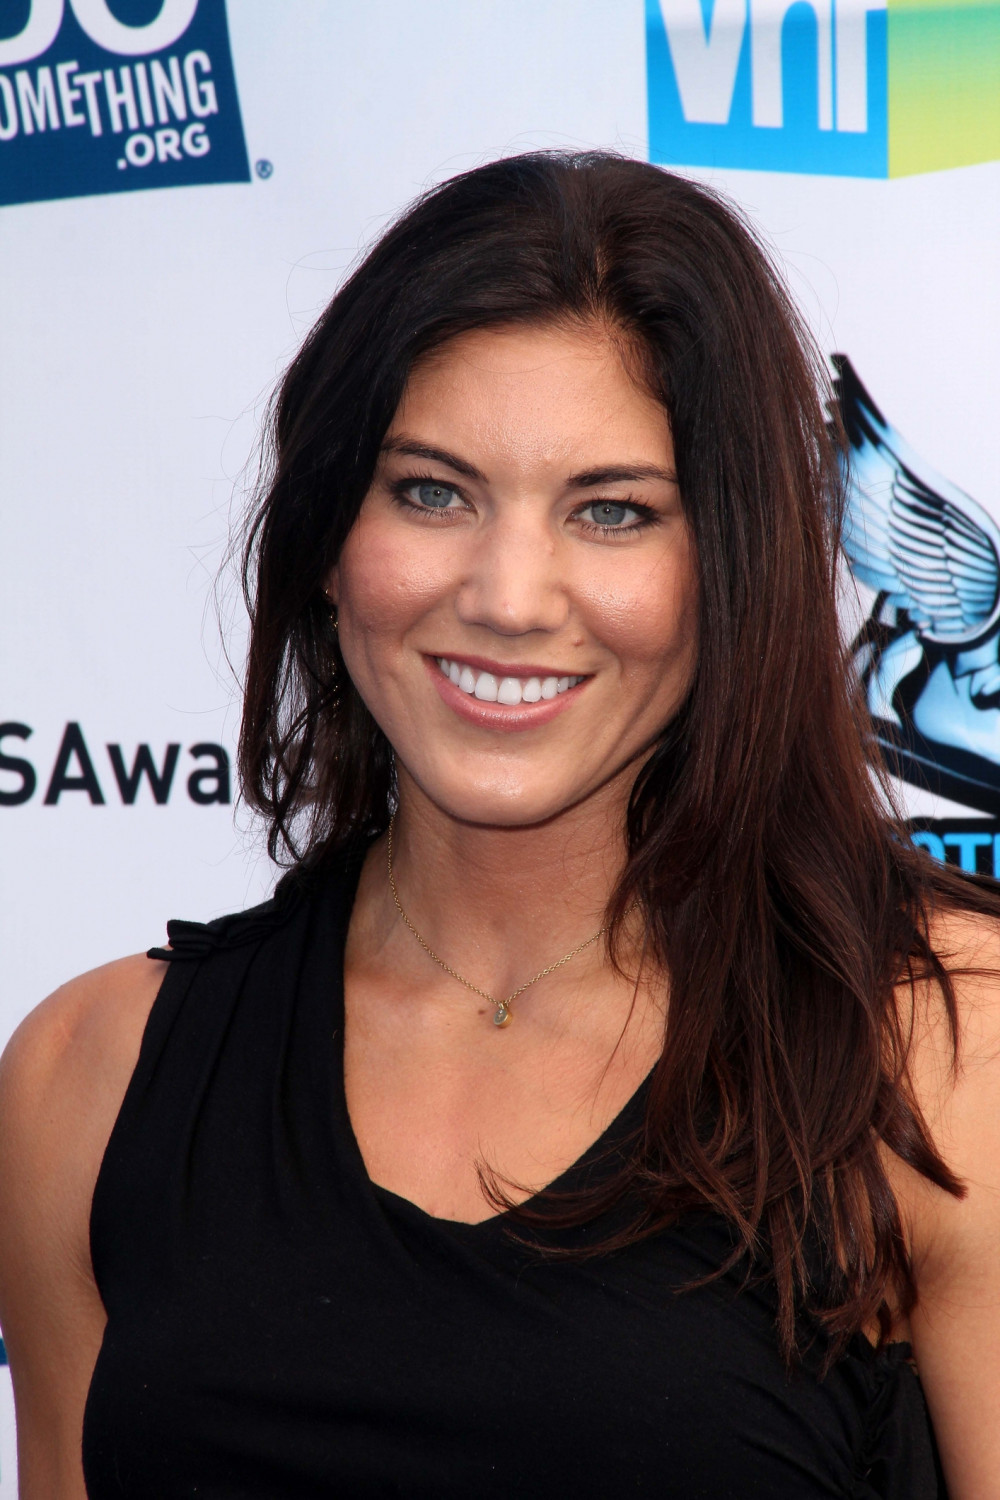 U.S Womens Football Team Star HOPE SOLO Arrested for Domestic.